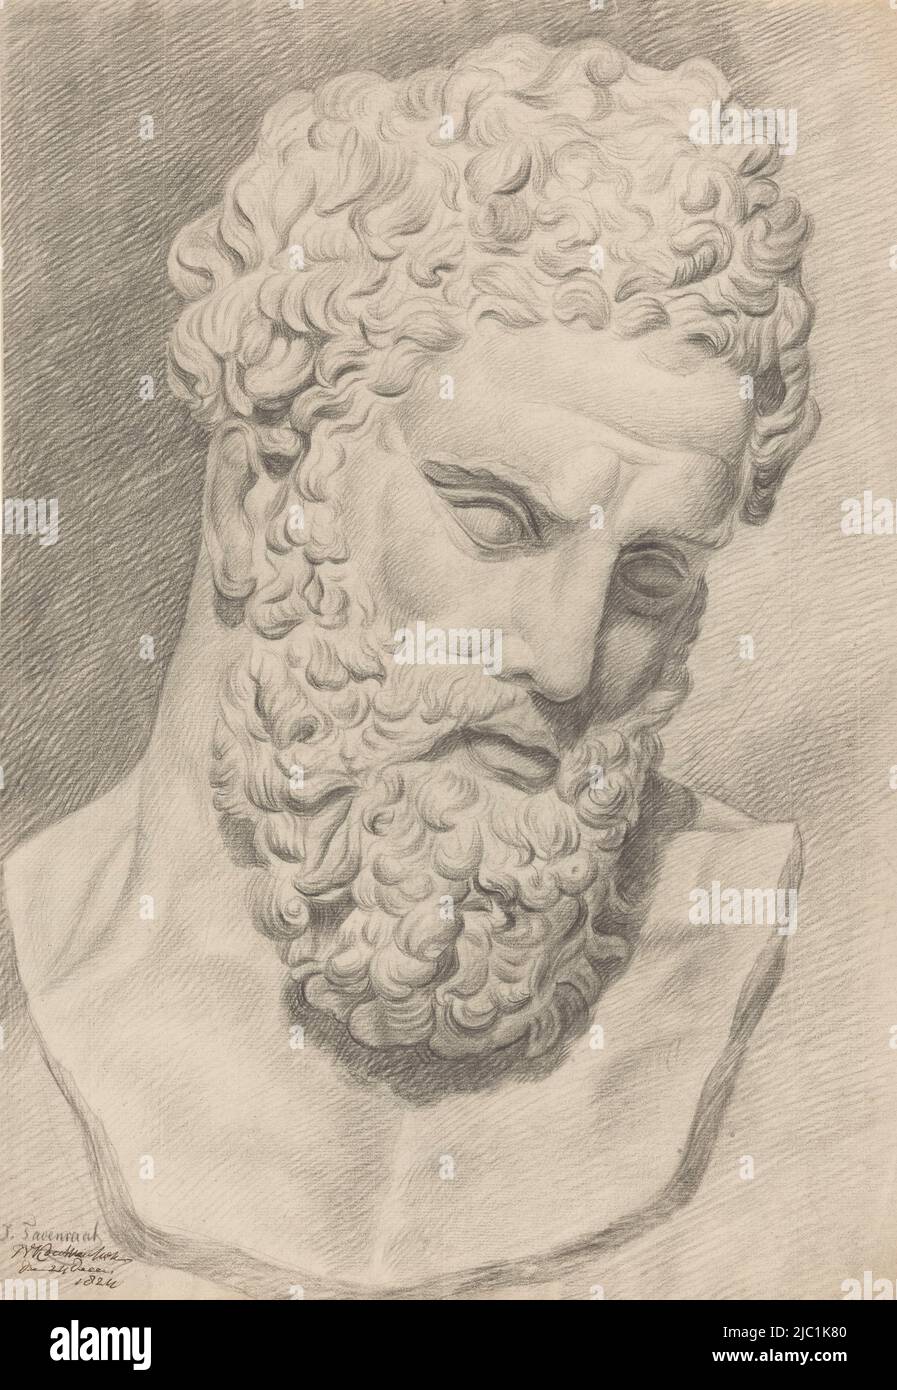 Academy study: plaster statue of man with beard, draughtsman: Johannes Tavenraat, anonymous, 1824, paper, h 530 mm × w 367 mm Stock Photo